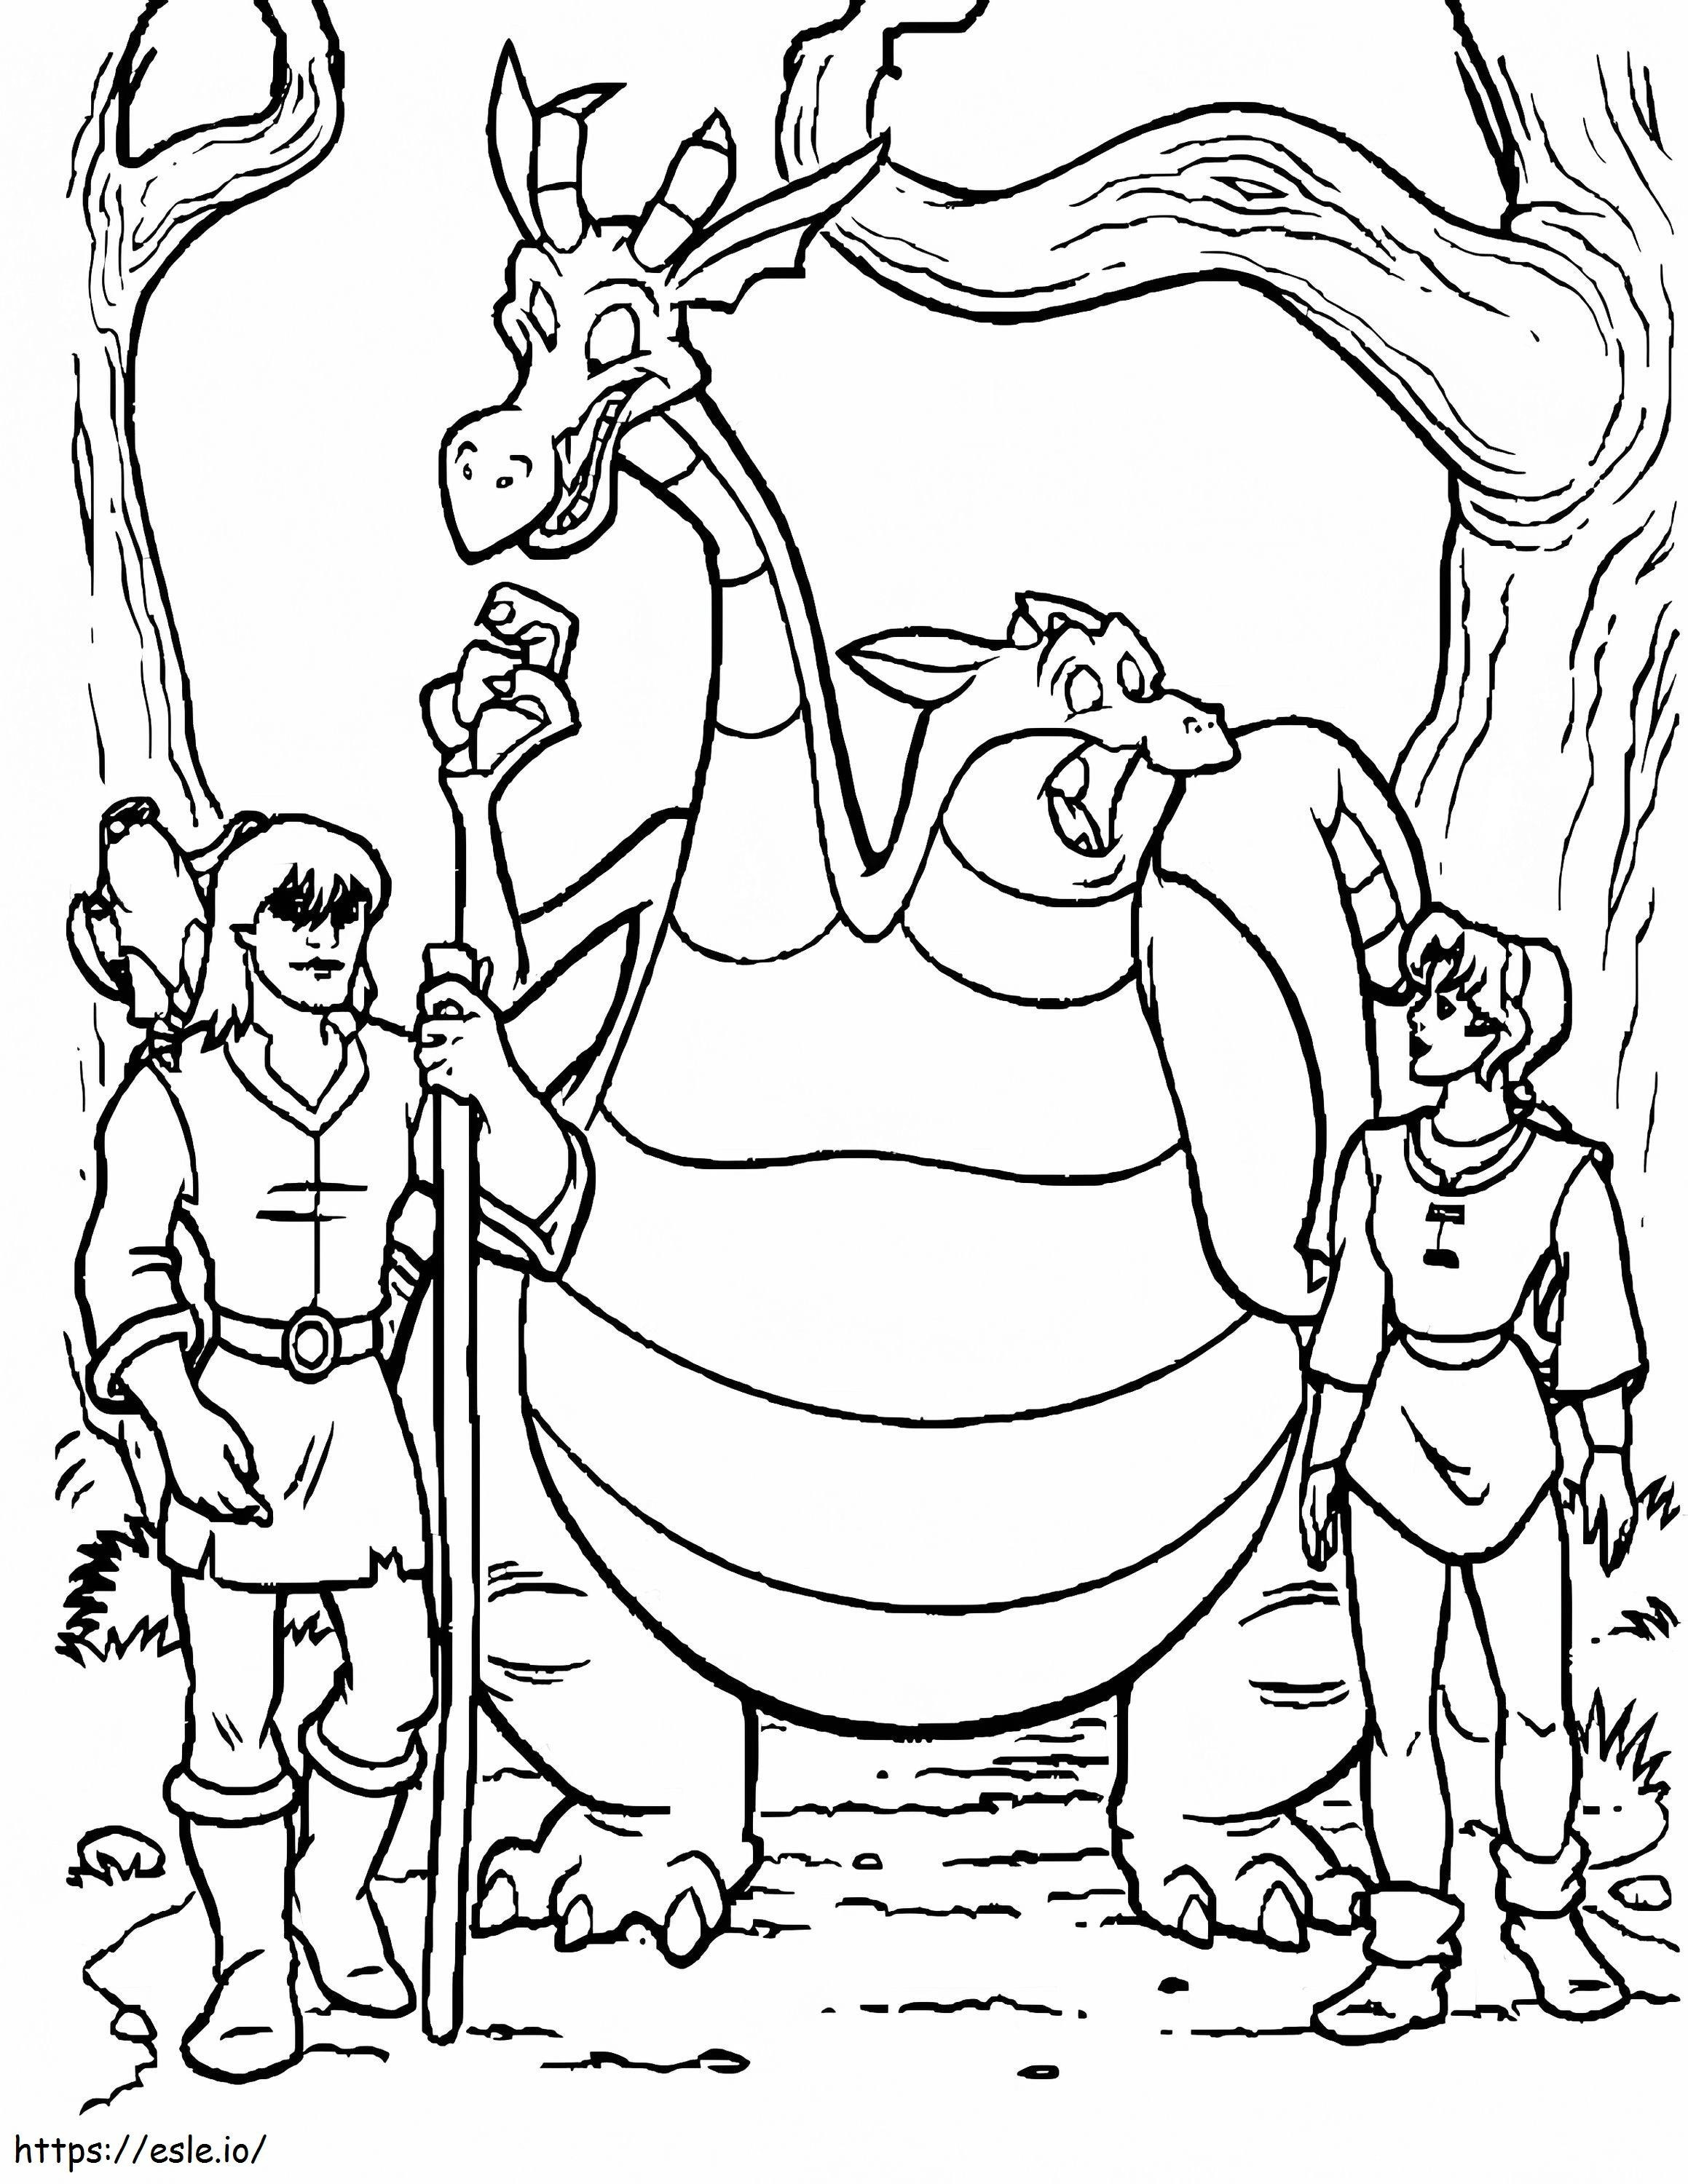 Quest For Camelot 1 coloring page